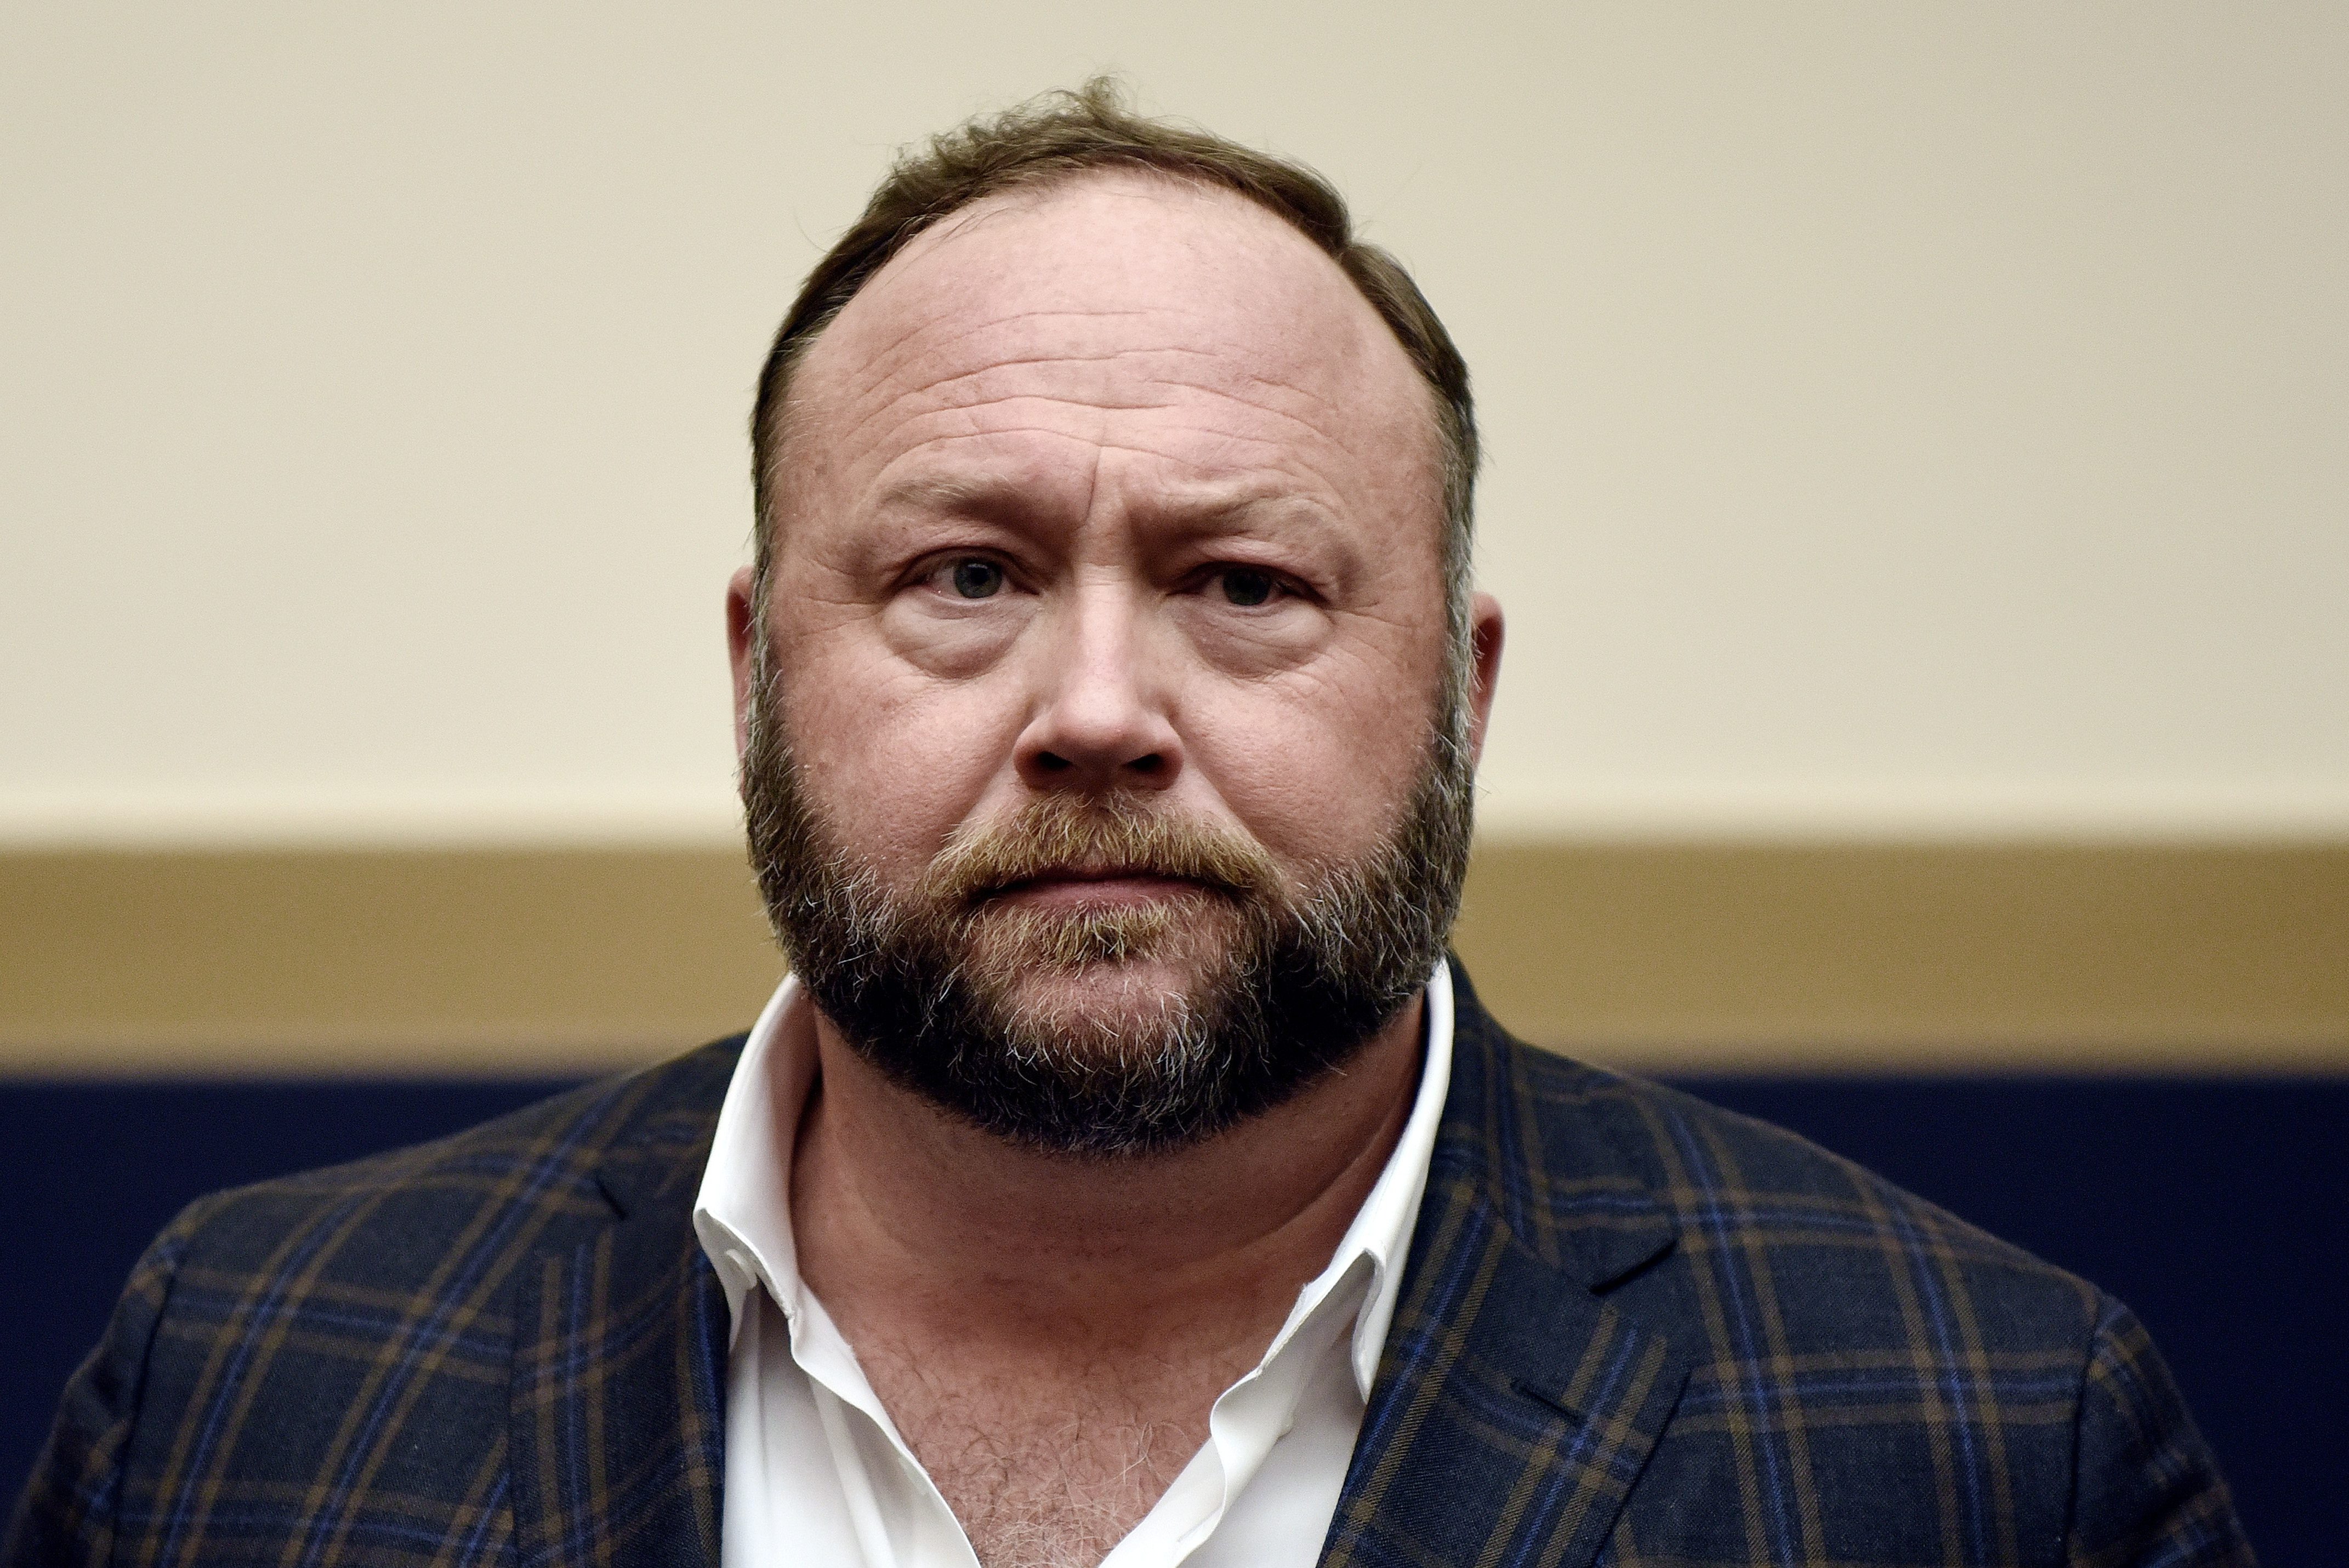 Infowars founder Alex Jones attends Google CEO Sundar Pichai's hearing before the House Judiciary committee on Capitol Hill December 11, 2018 in Washington, DC. 